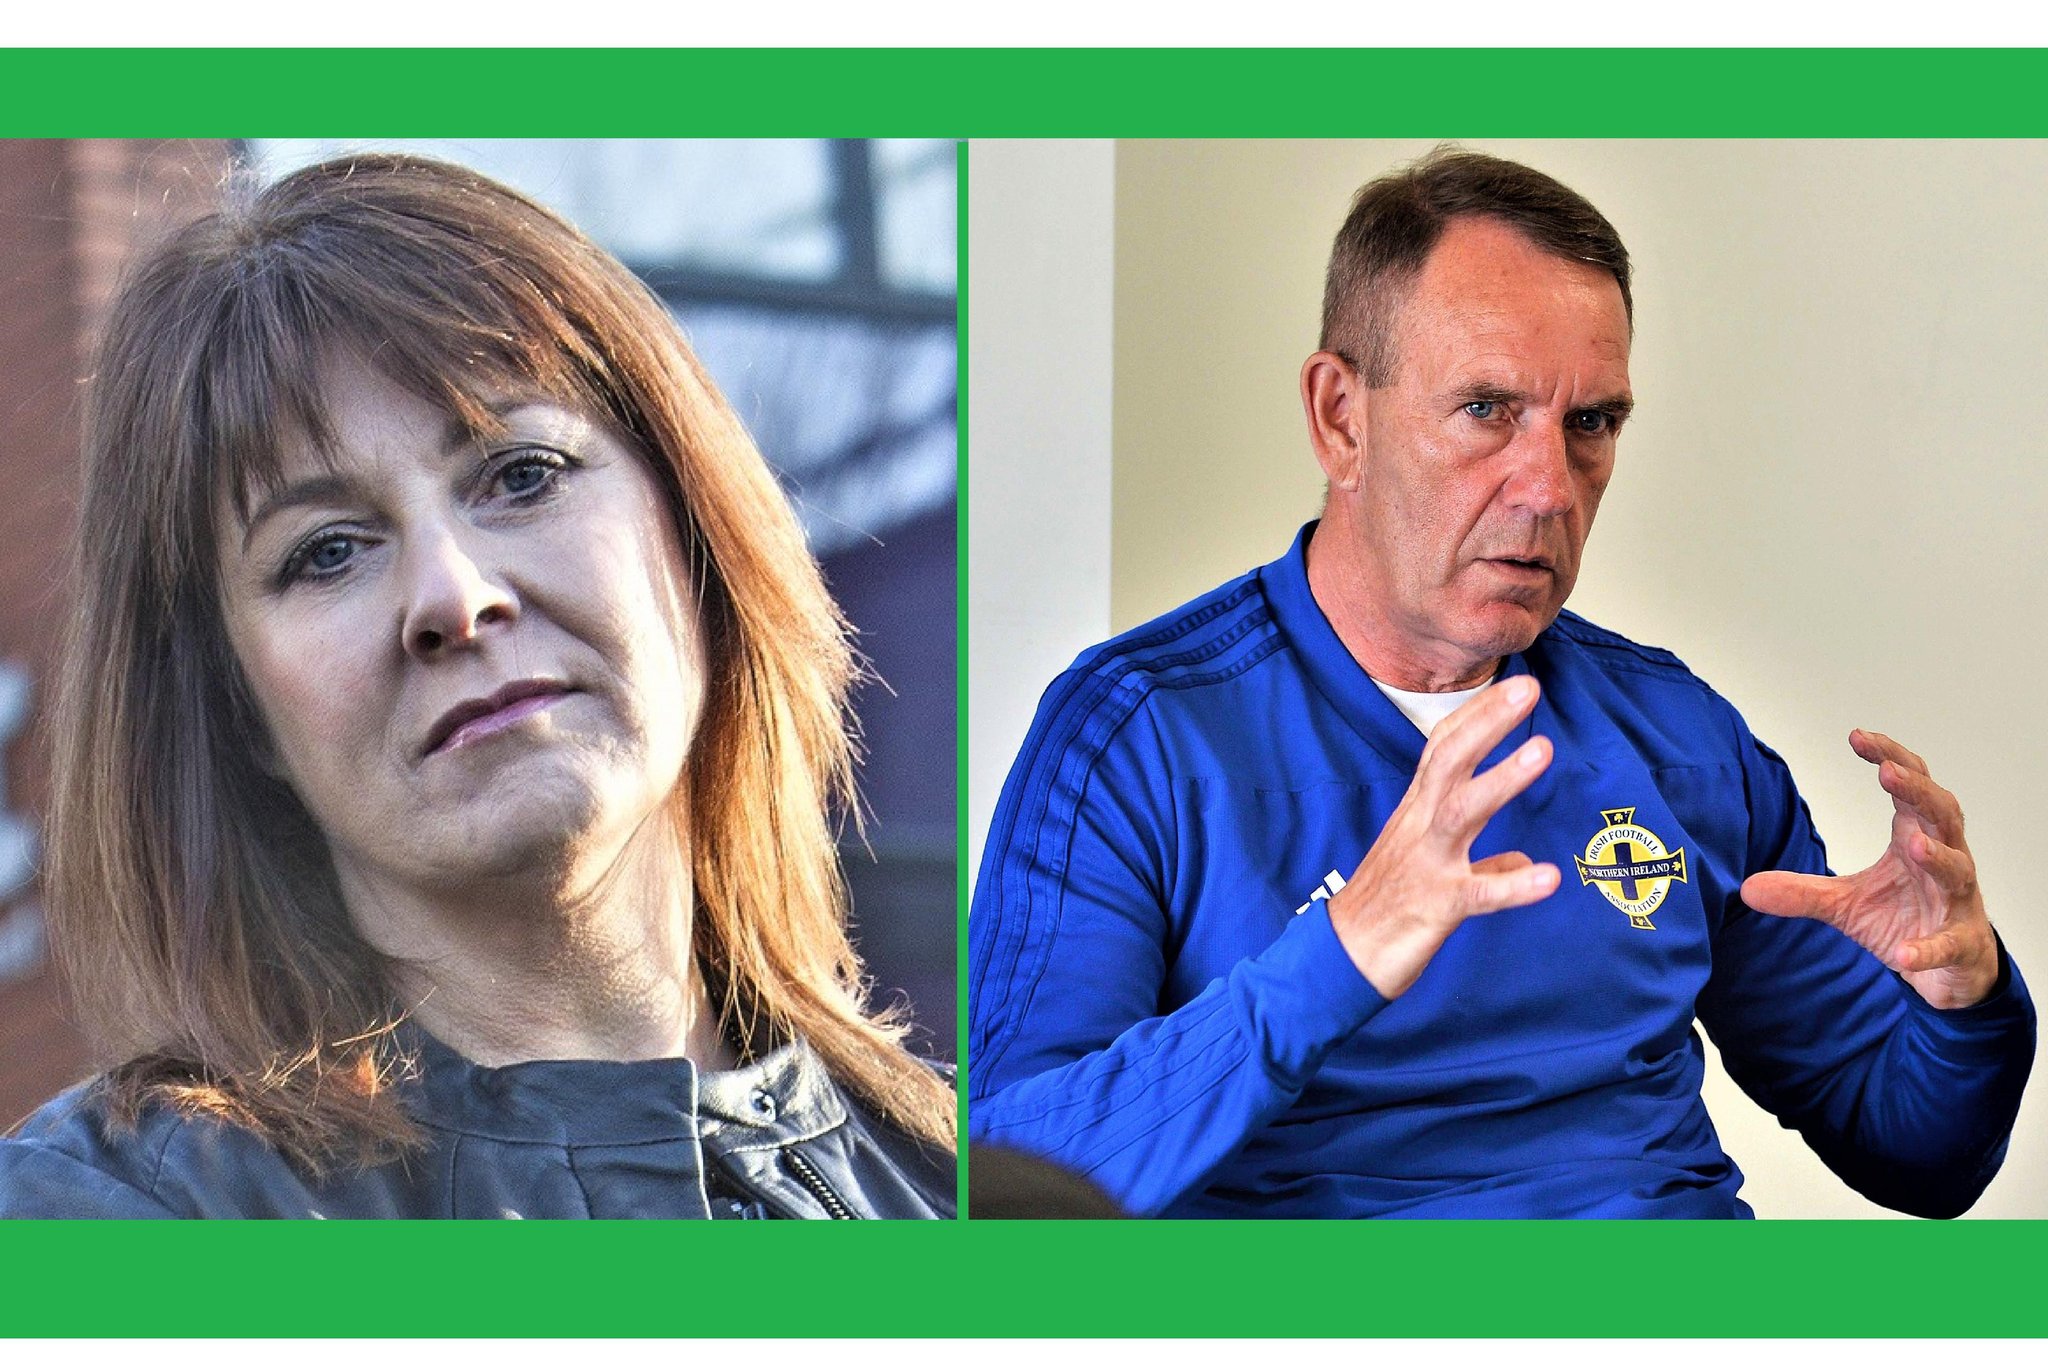 Sport NI chief adds voice to chorus of condemnation over Kenny Shiels comments about women being more emotional than men